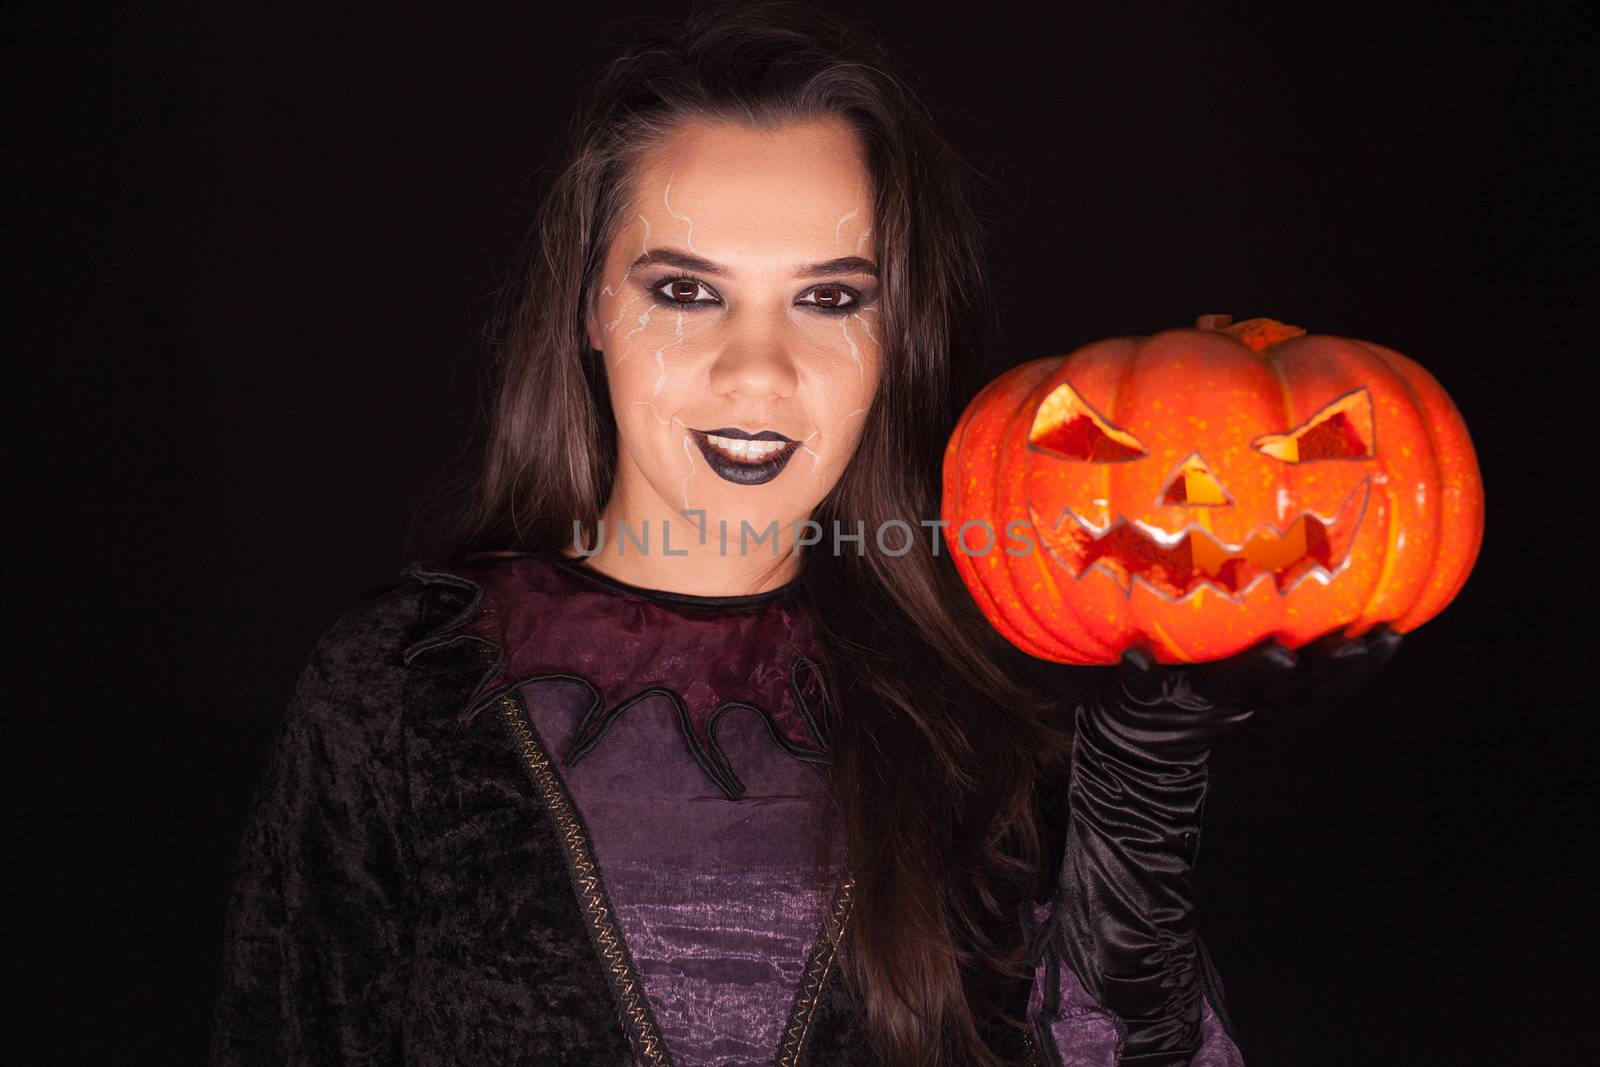 Lady in witch costume holding a pumpkin over black background by DCStudio